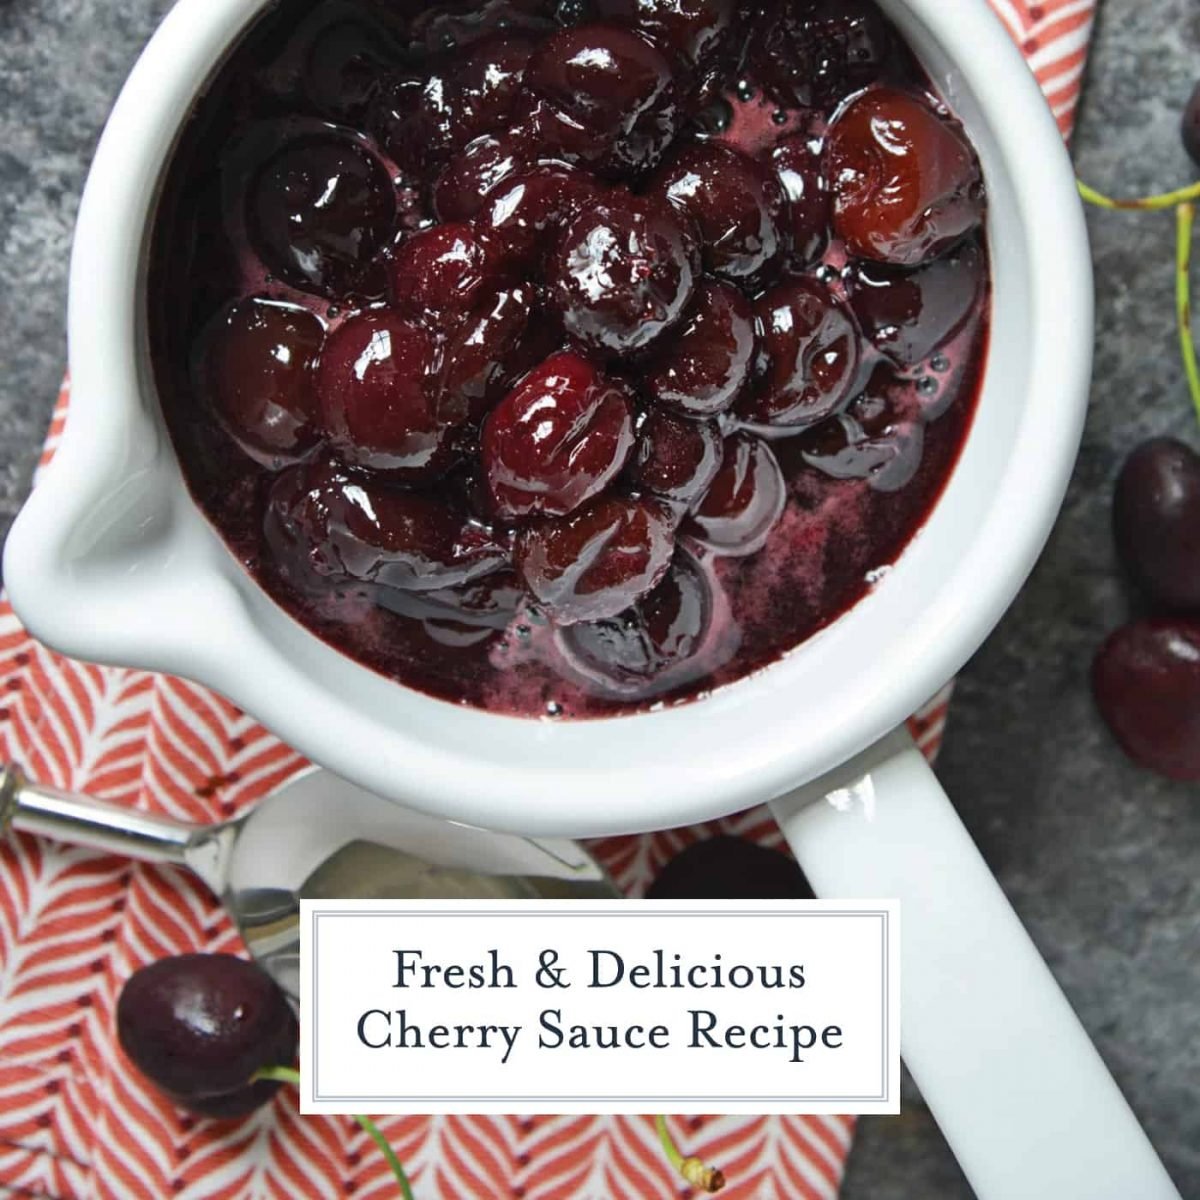 This Fresh Cherry Sauce is a yummy way to use fresh cherries. Spoon over ice cream, cake, waffles and more! #cherrysaucerecipe #freshcherryrecipes #desserttoppings www.savoryexperiments.com